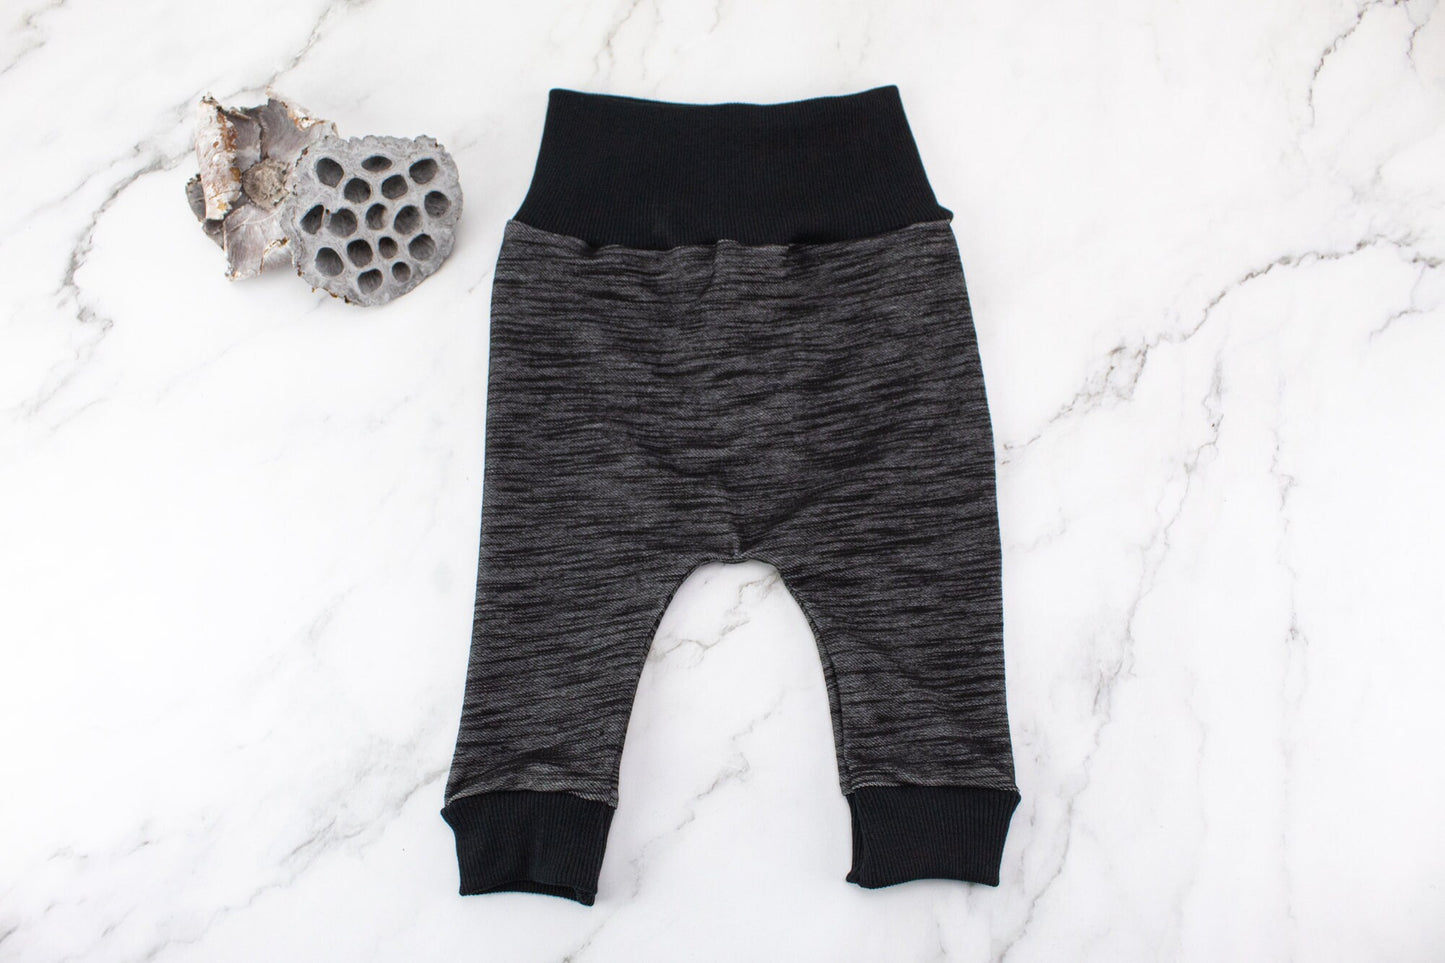 Black and Gray Space Dyed Knit Harem Pants with Wide Black Band 3-6 months or 12-18 months